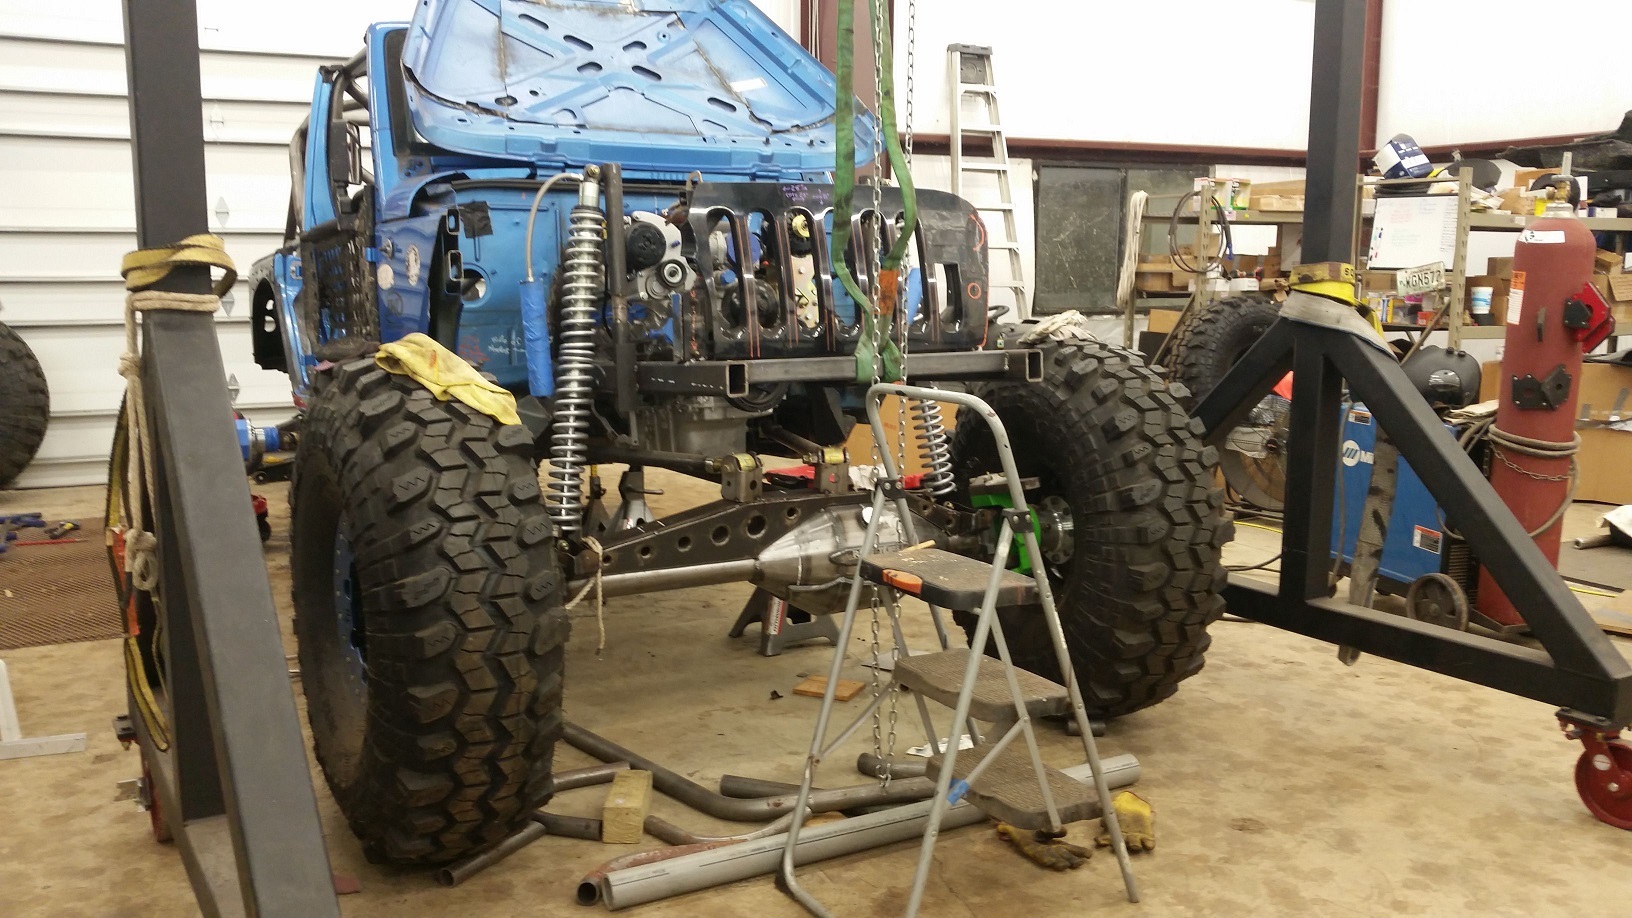 334136-blue-jeep-build-jeep-c oilovers.jpg